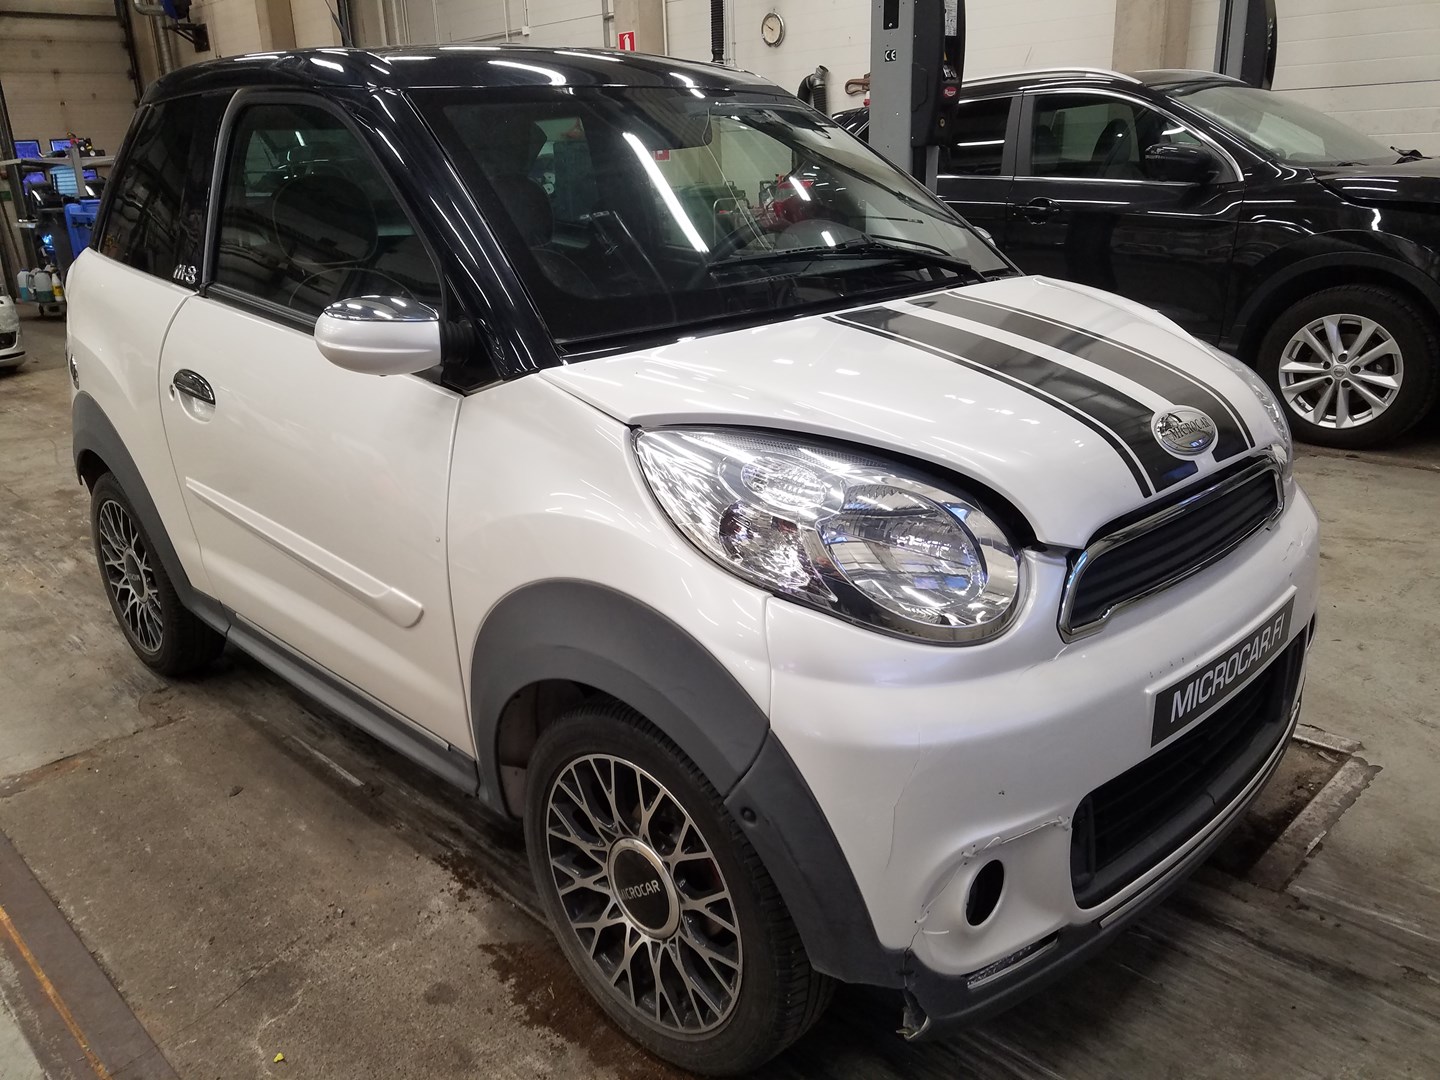 2014 MICROCAR M8 for sale at Pirkkala on Wednesday, September 23, 2020 -  Copart Finland